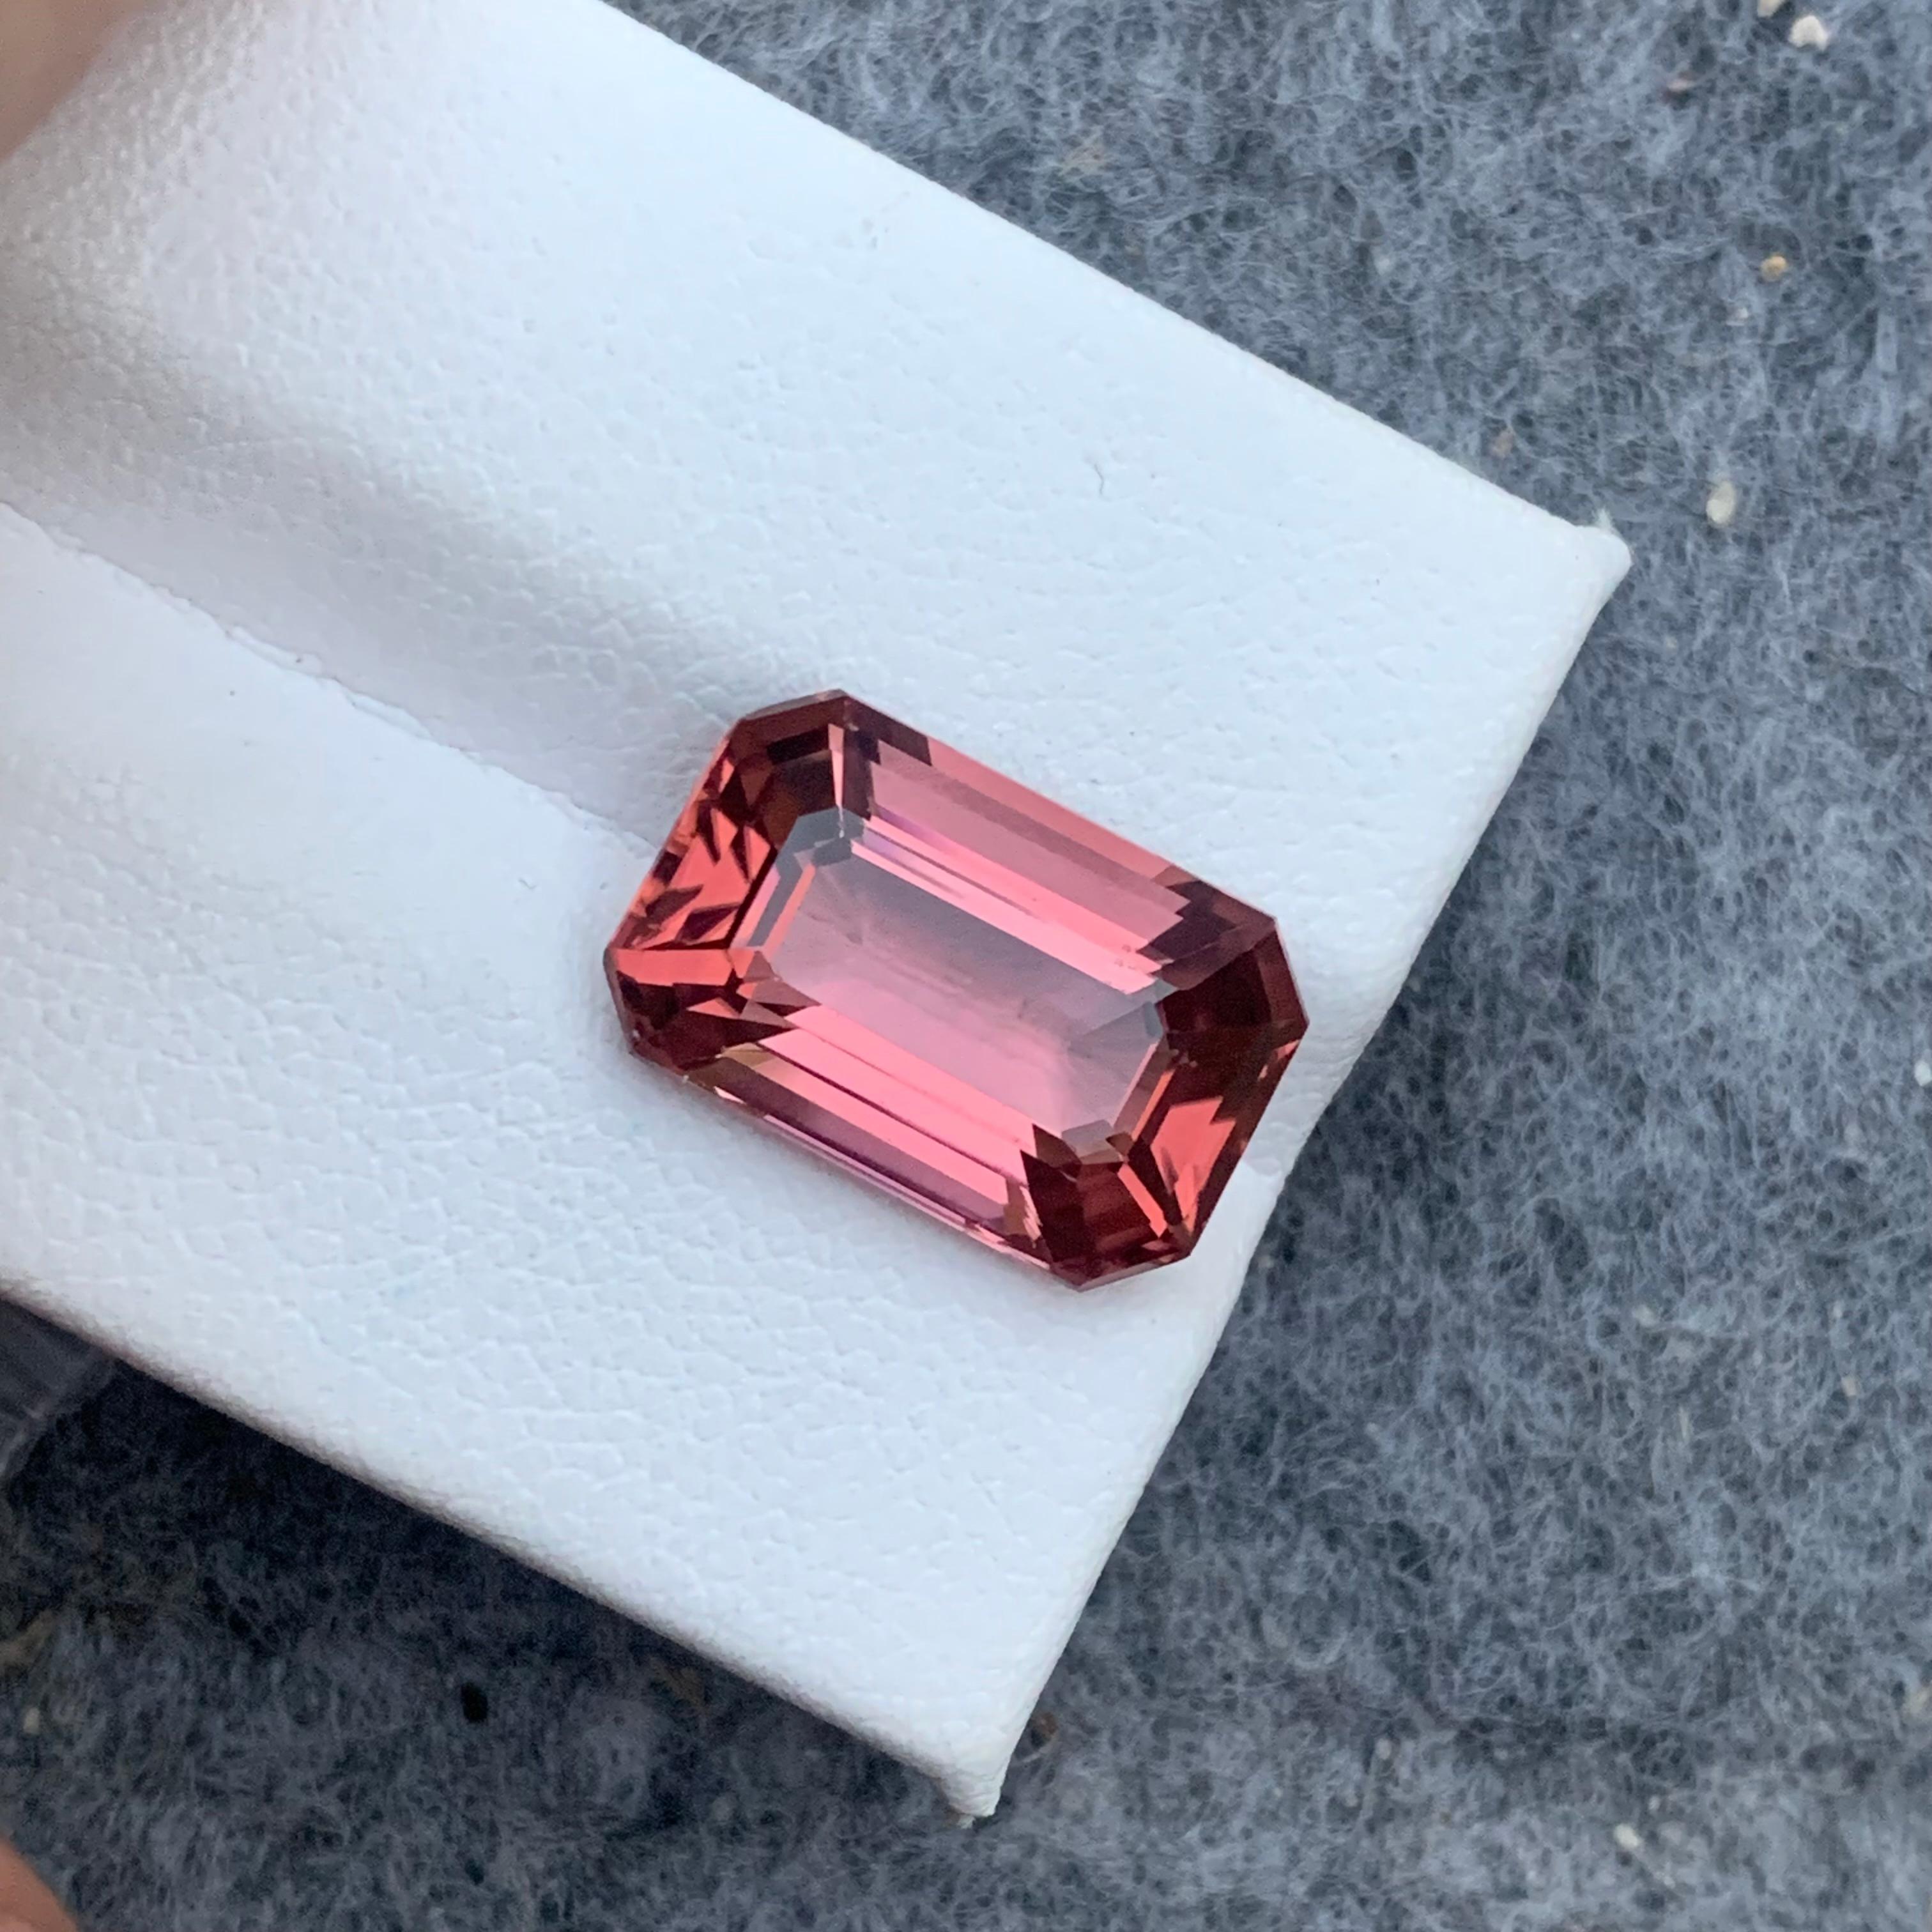 9.0 Carat AAA Quality Loose Soft Pink Tourmaline Emerald Cut From Afghanistan 7